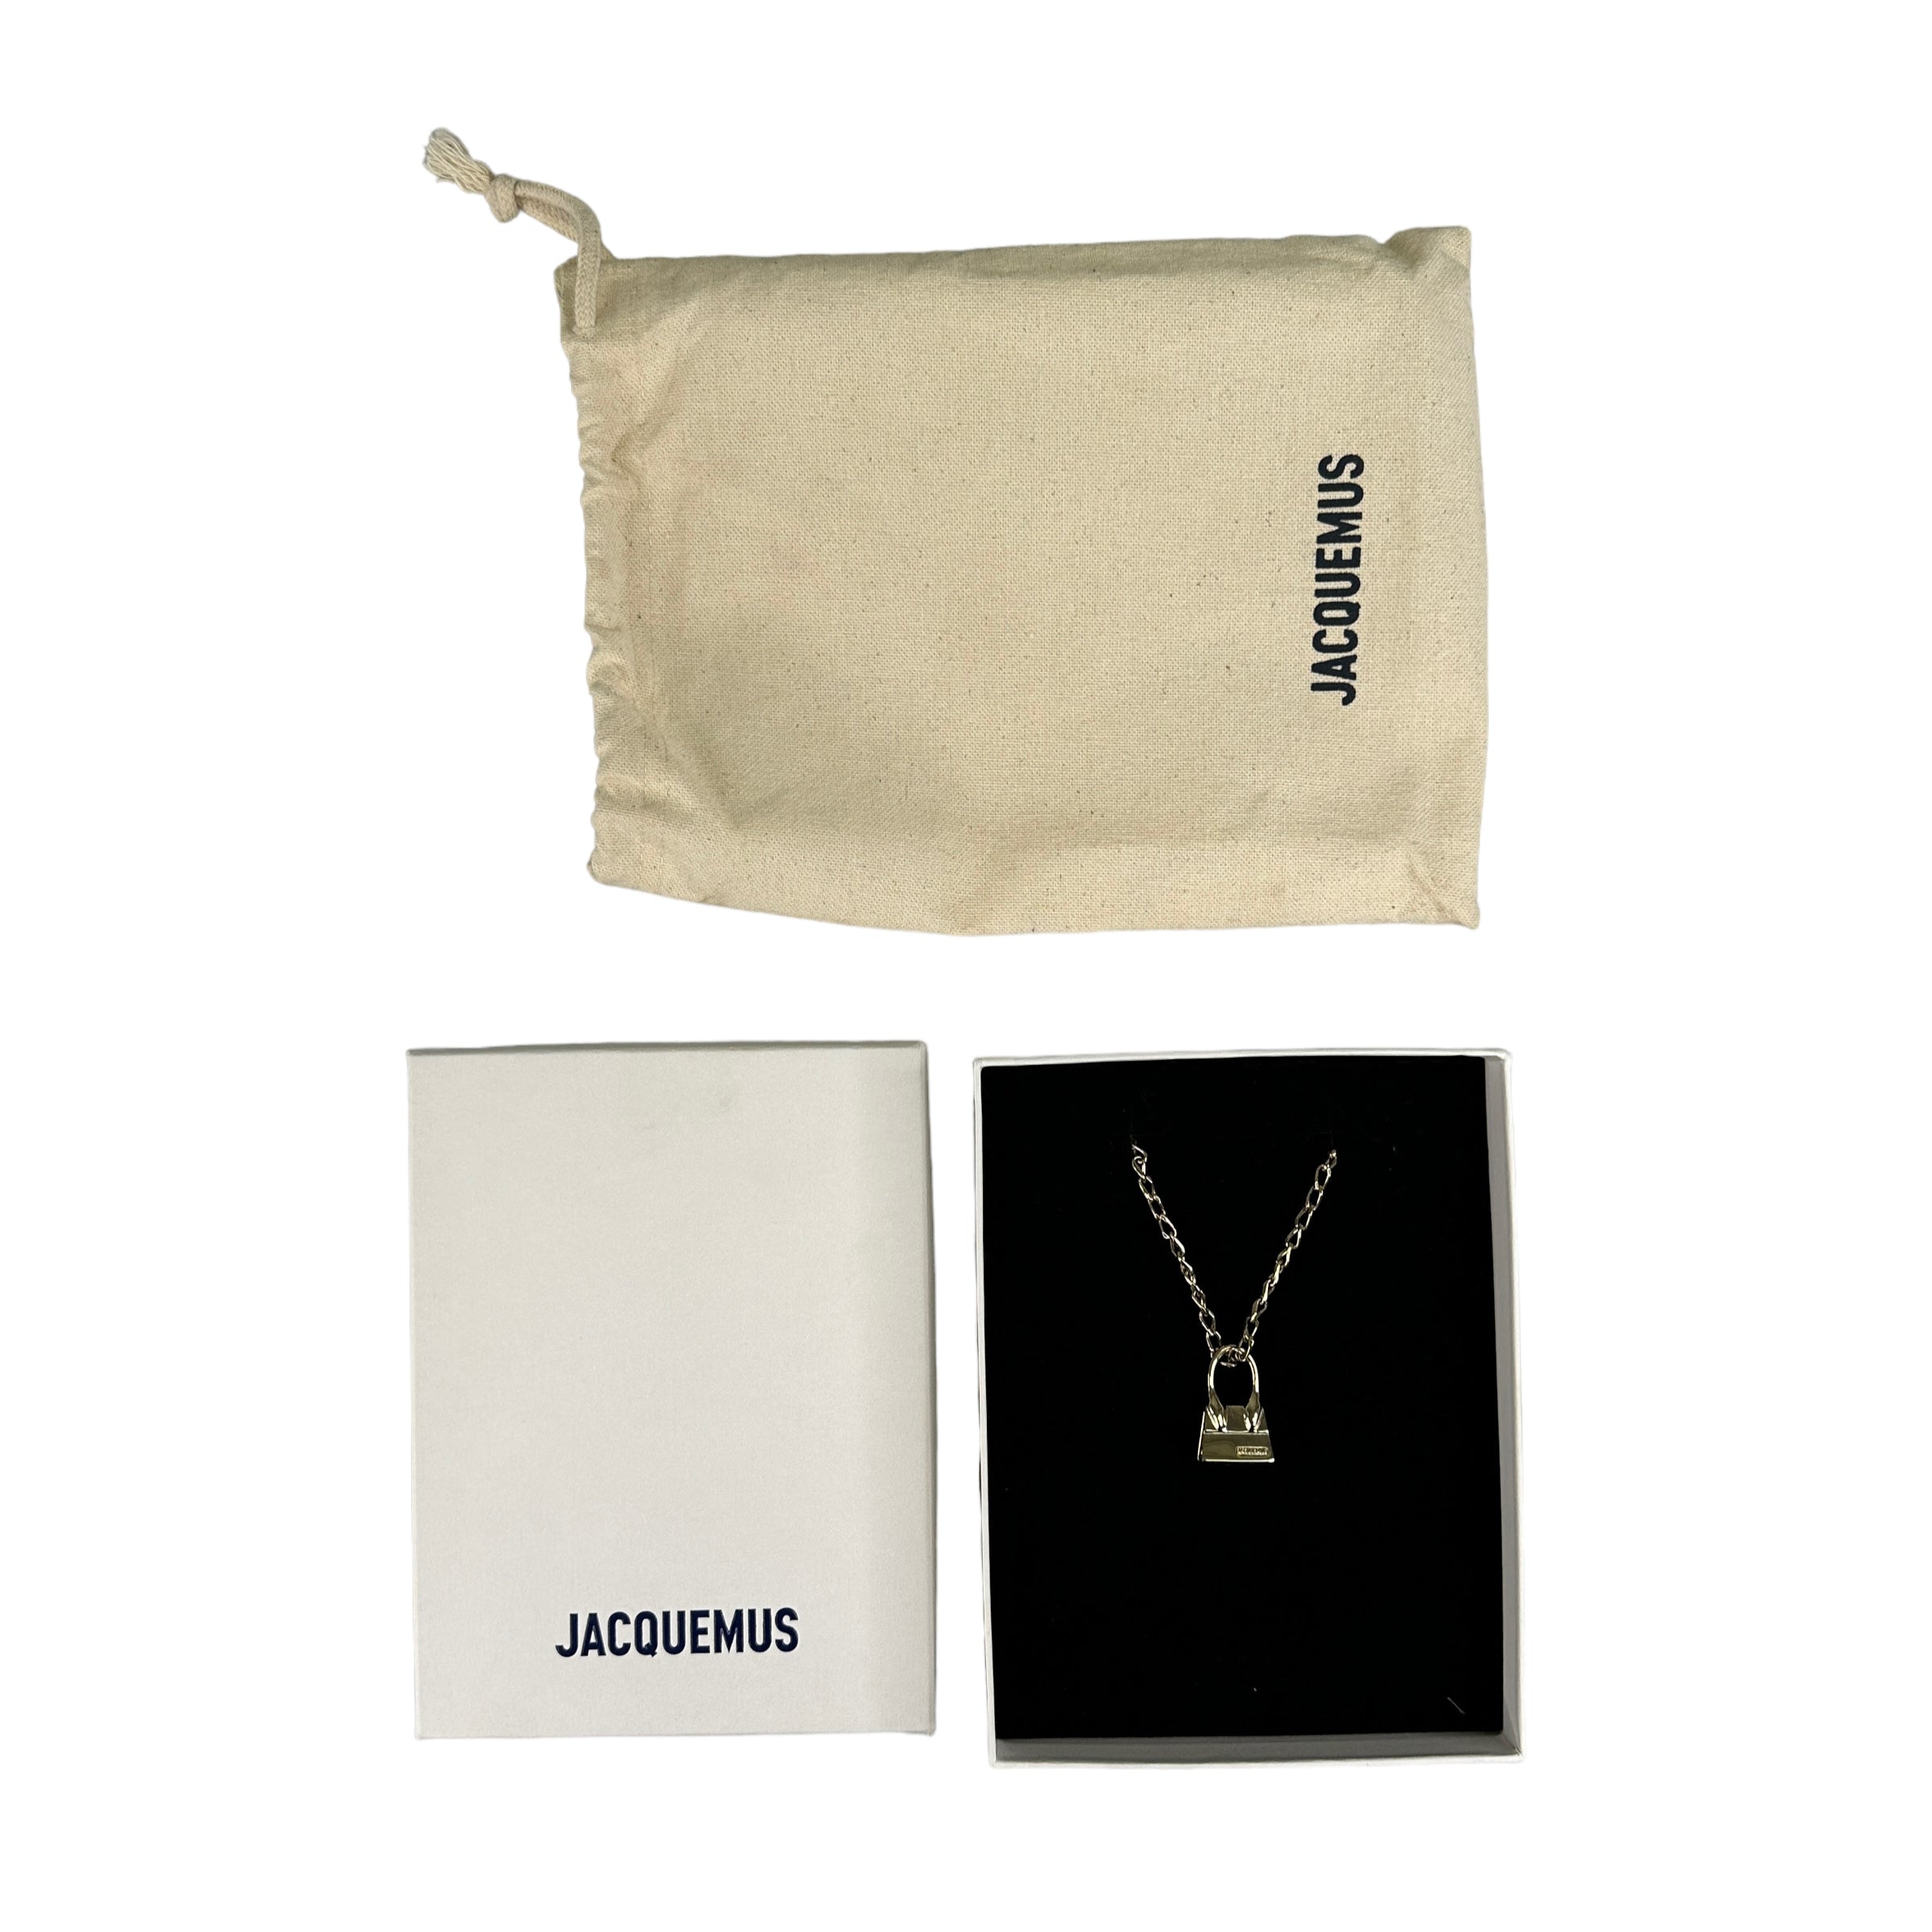 (NEW) JACQUEMUS CHIQUITO GOLD-TONE NECKLACE